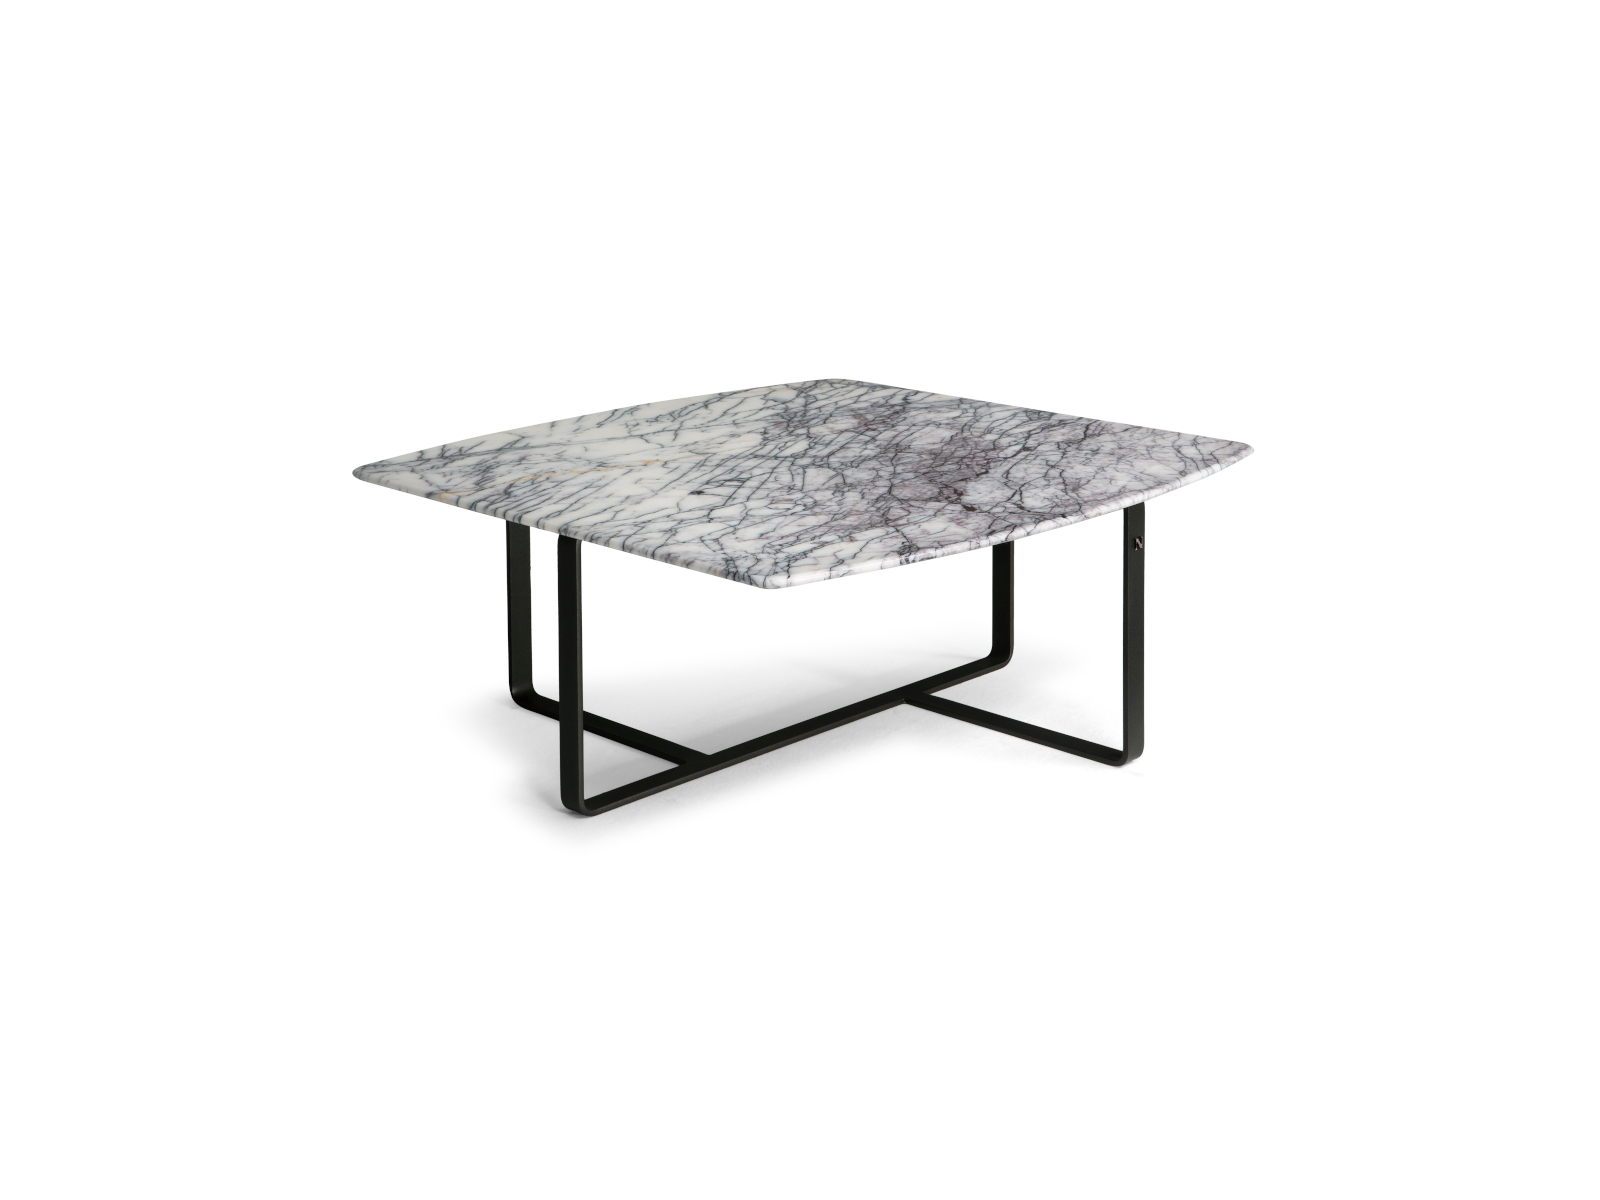 Preset default image - TEMPO Central coffee table